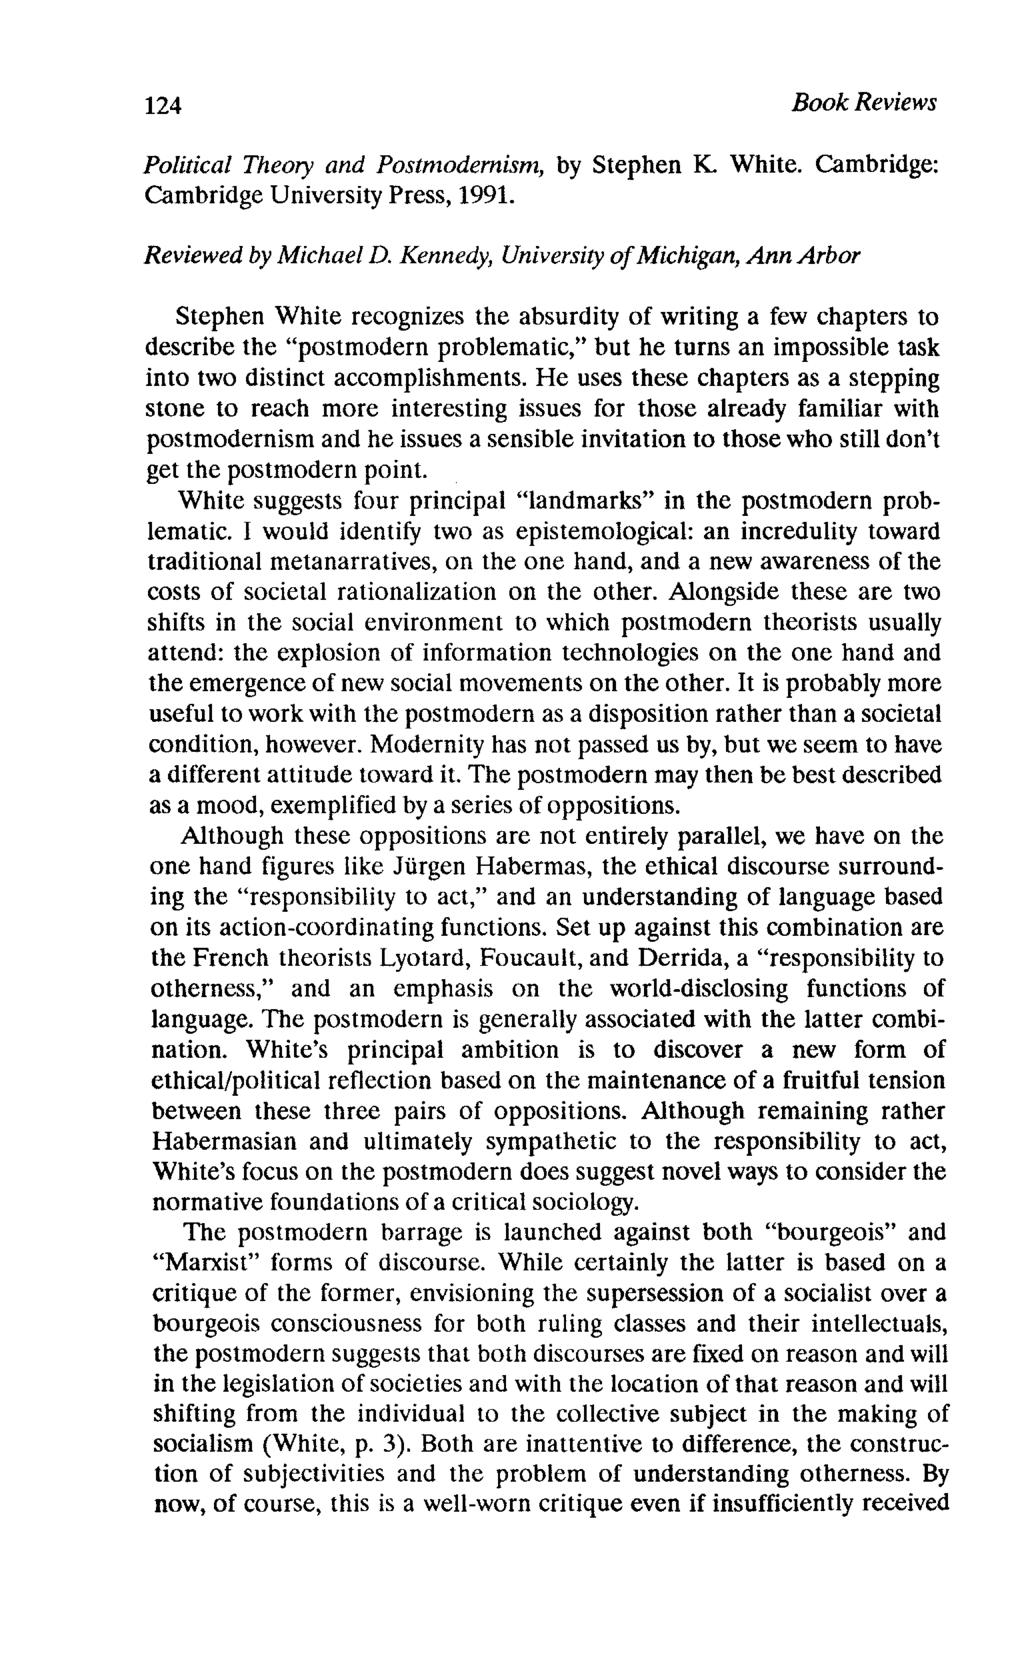 124 Political Theory and Postmodernism, by Stephen K White. Cambridge: Cambridge University Press, 1991. Reviewed by Michael D.